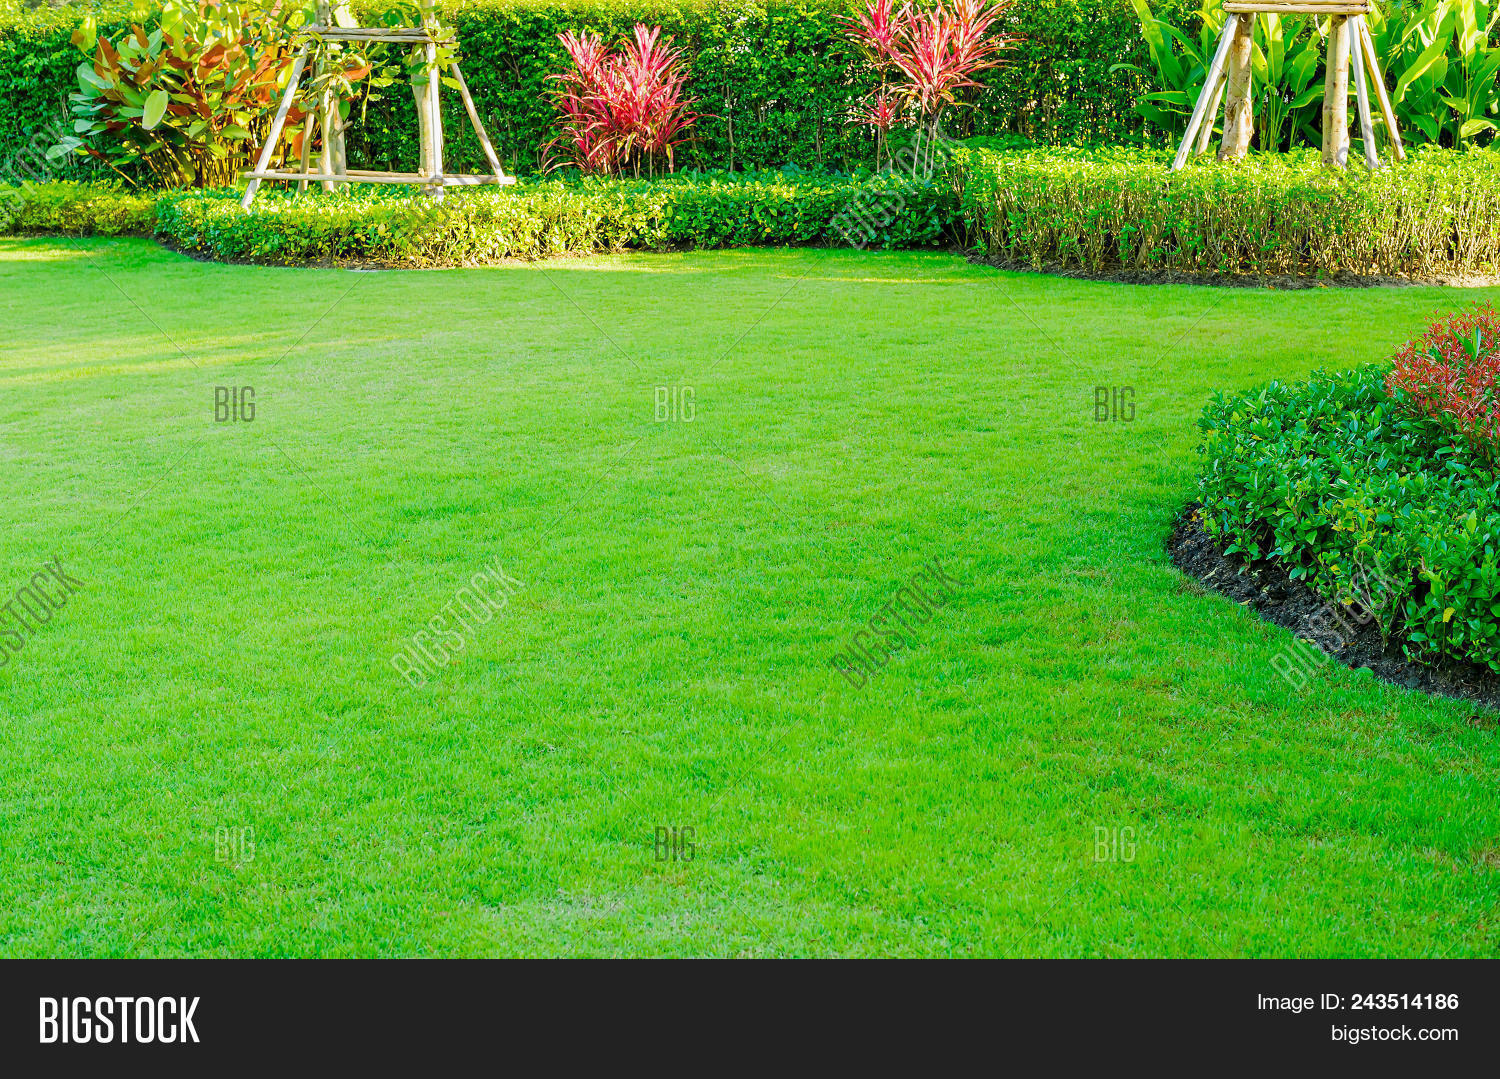 The Simple Guide to Enhance Your Ground Yard's Appeal and Functionality